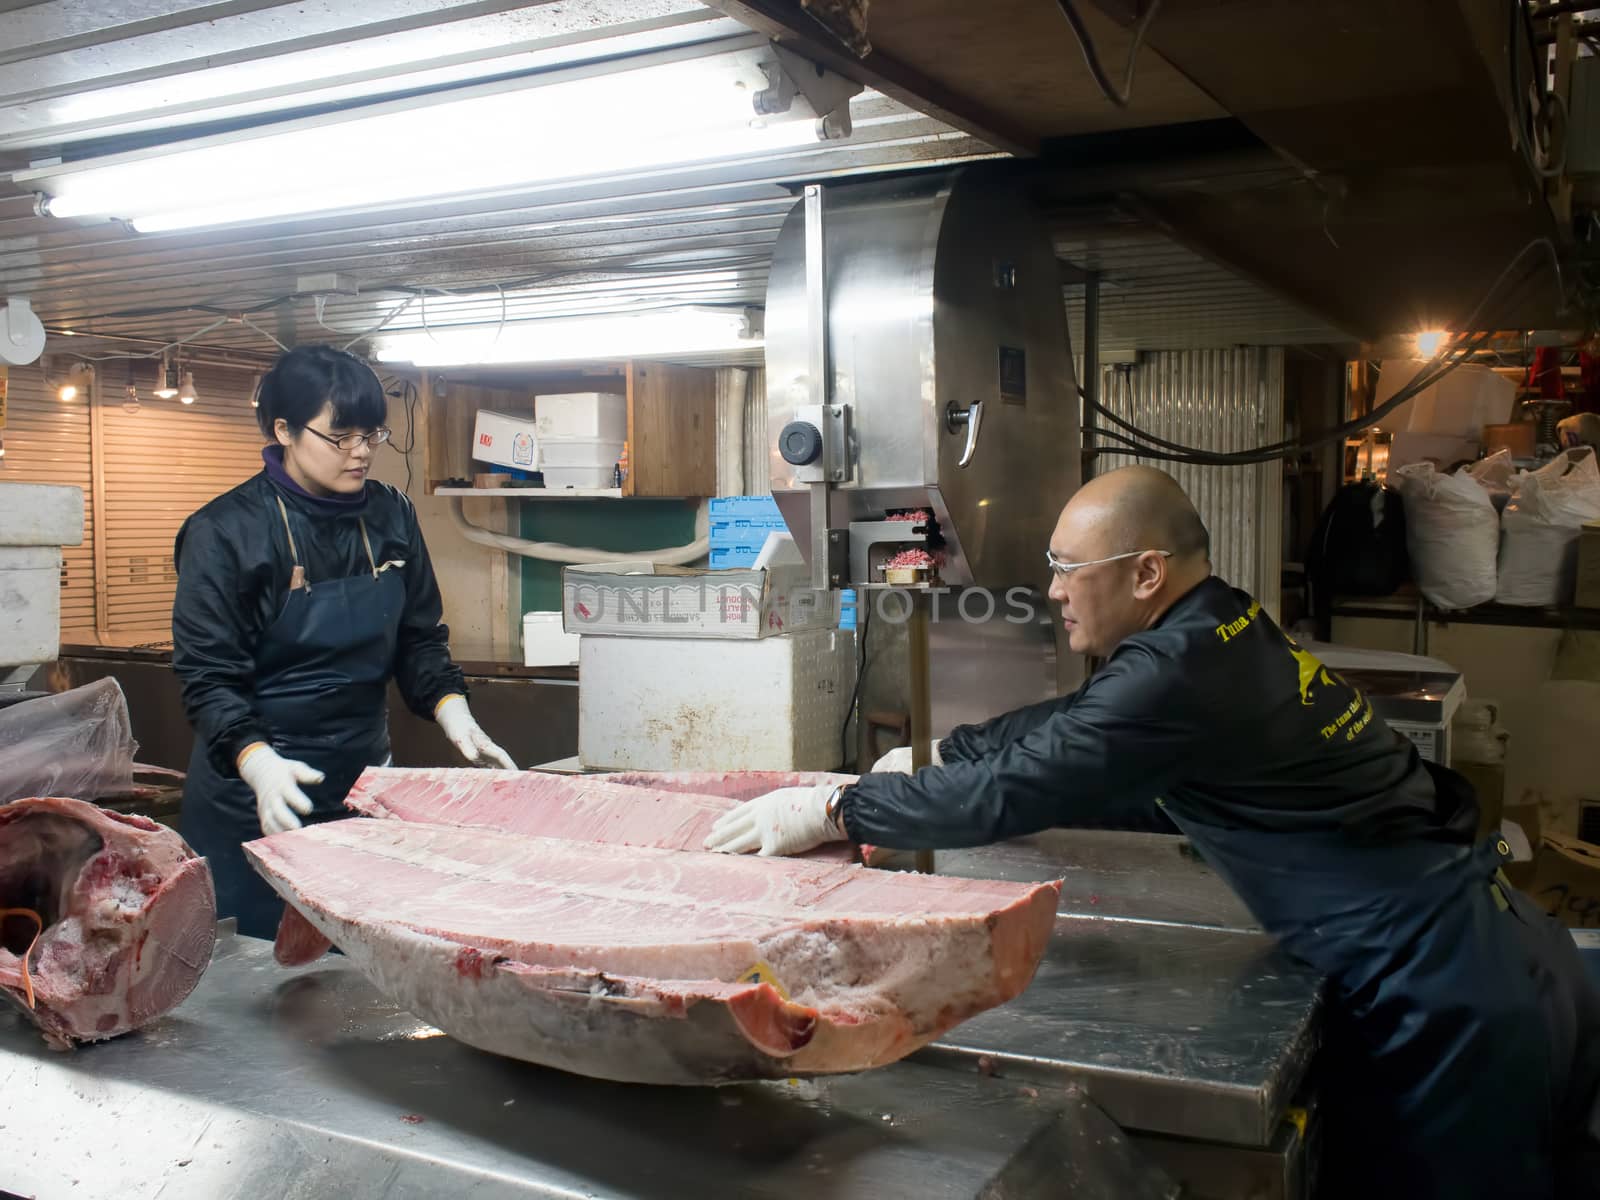 Workers cutting up a giant tuna with electric saw at Tsukiji fis by zkruger